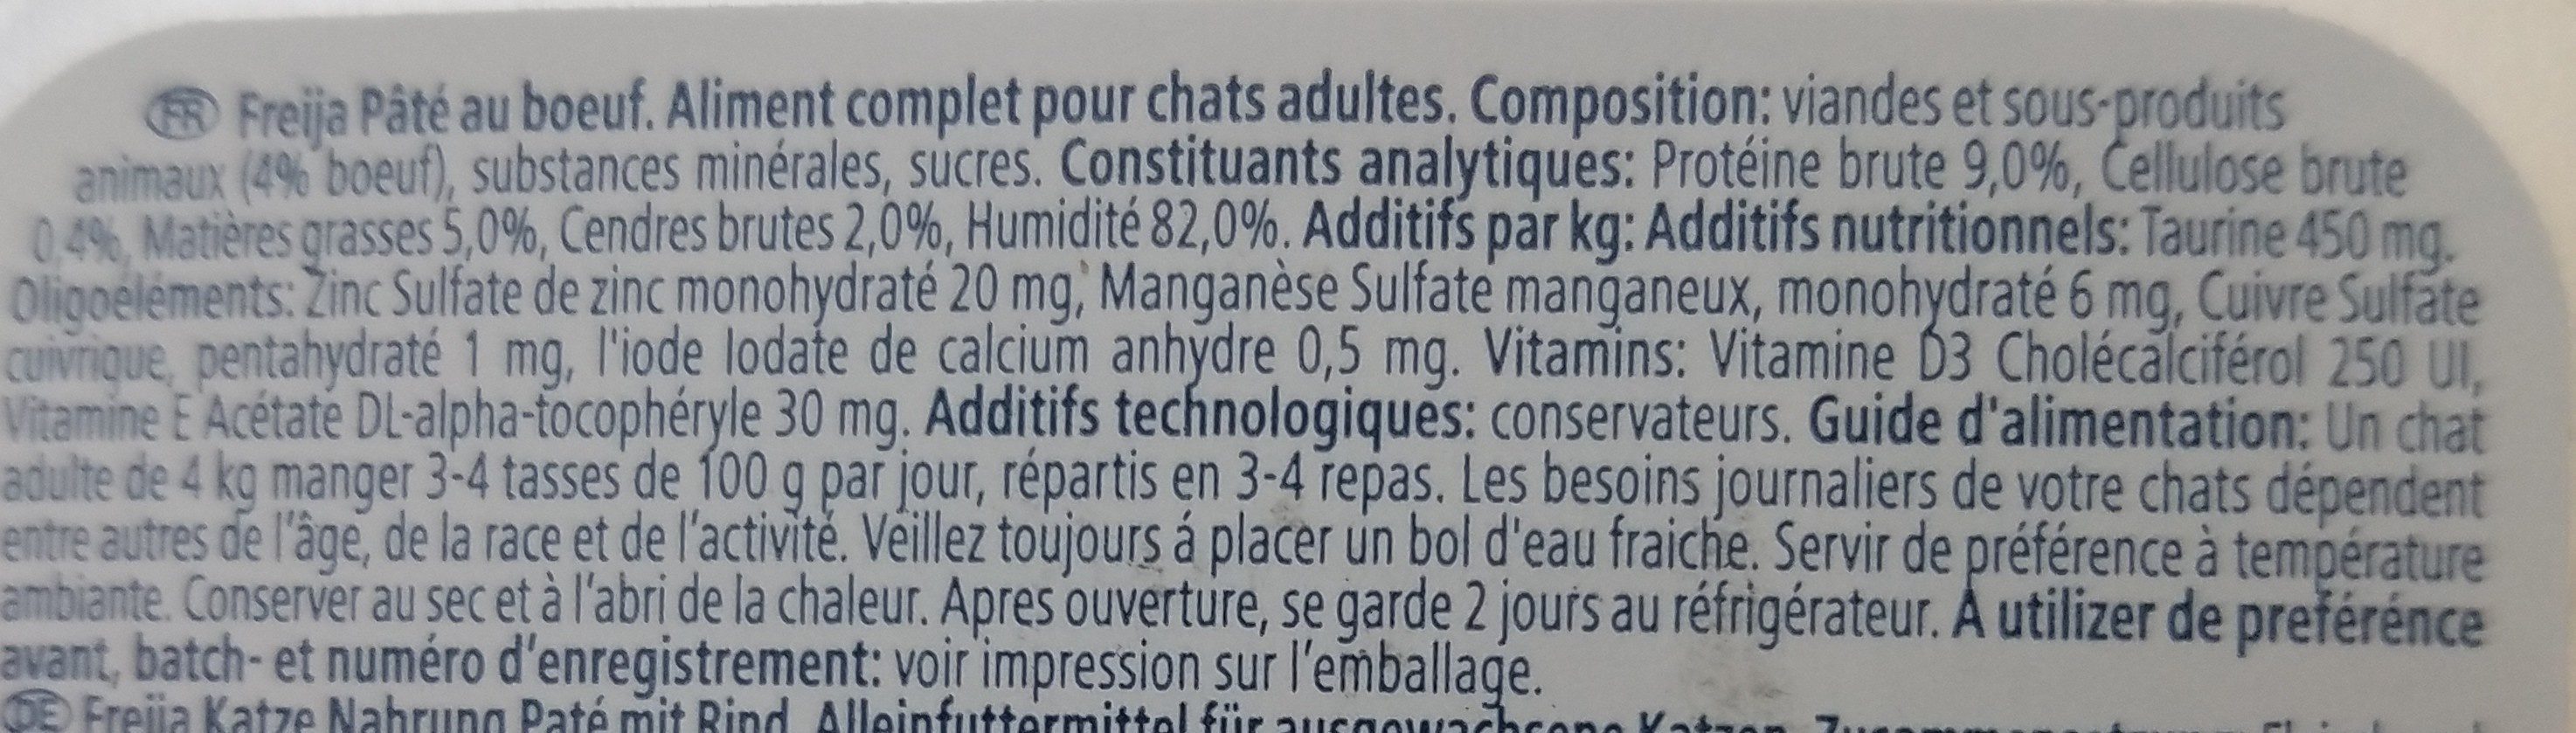 Aliments chats - Ingredients - fr